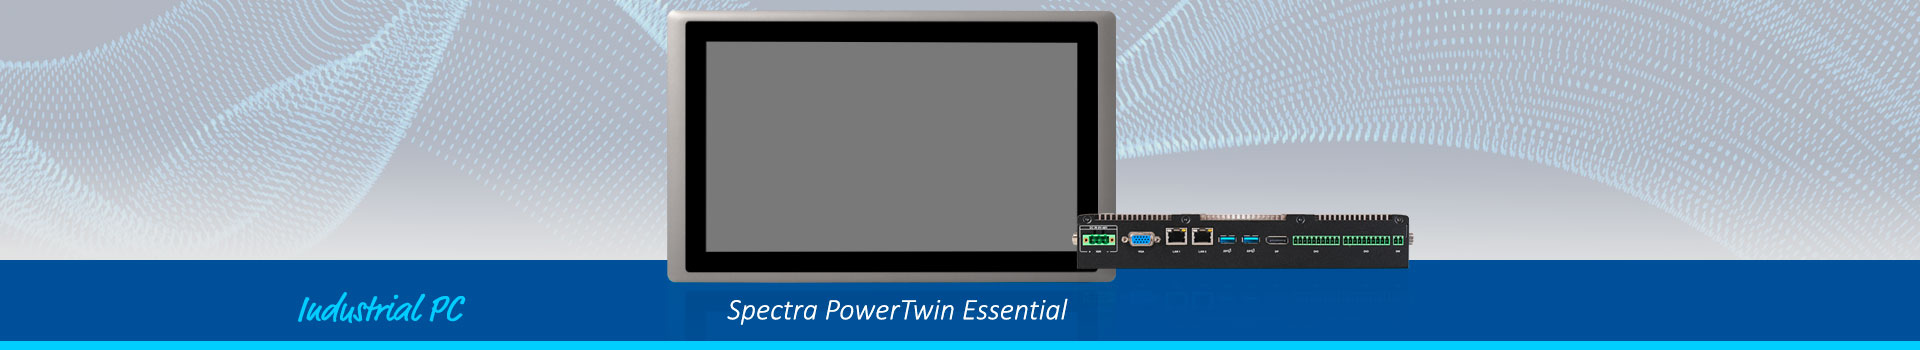 Banner Panel PC PowerTwin Essential